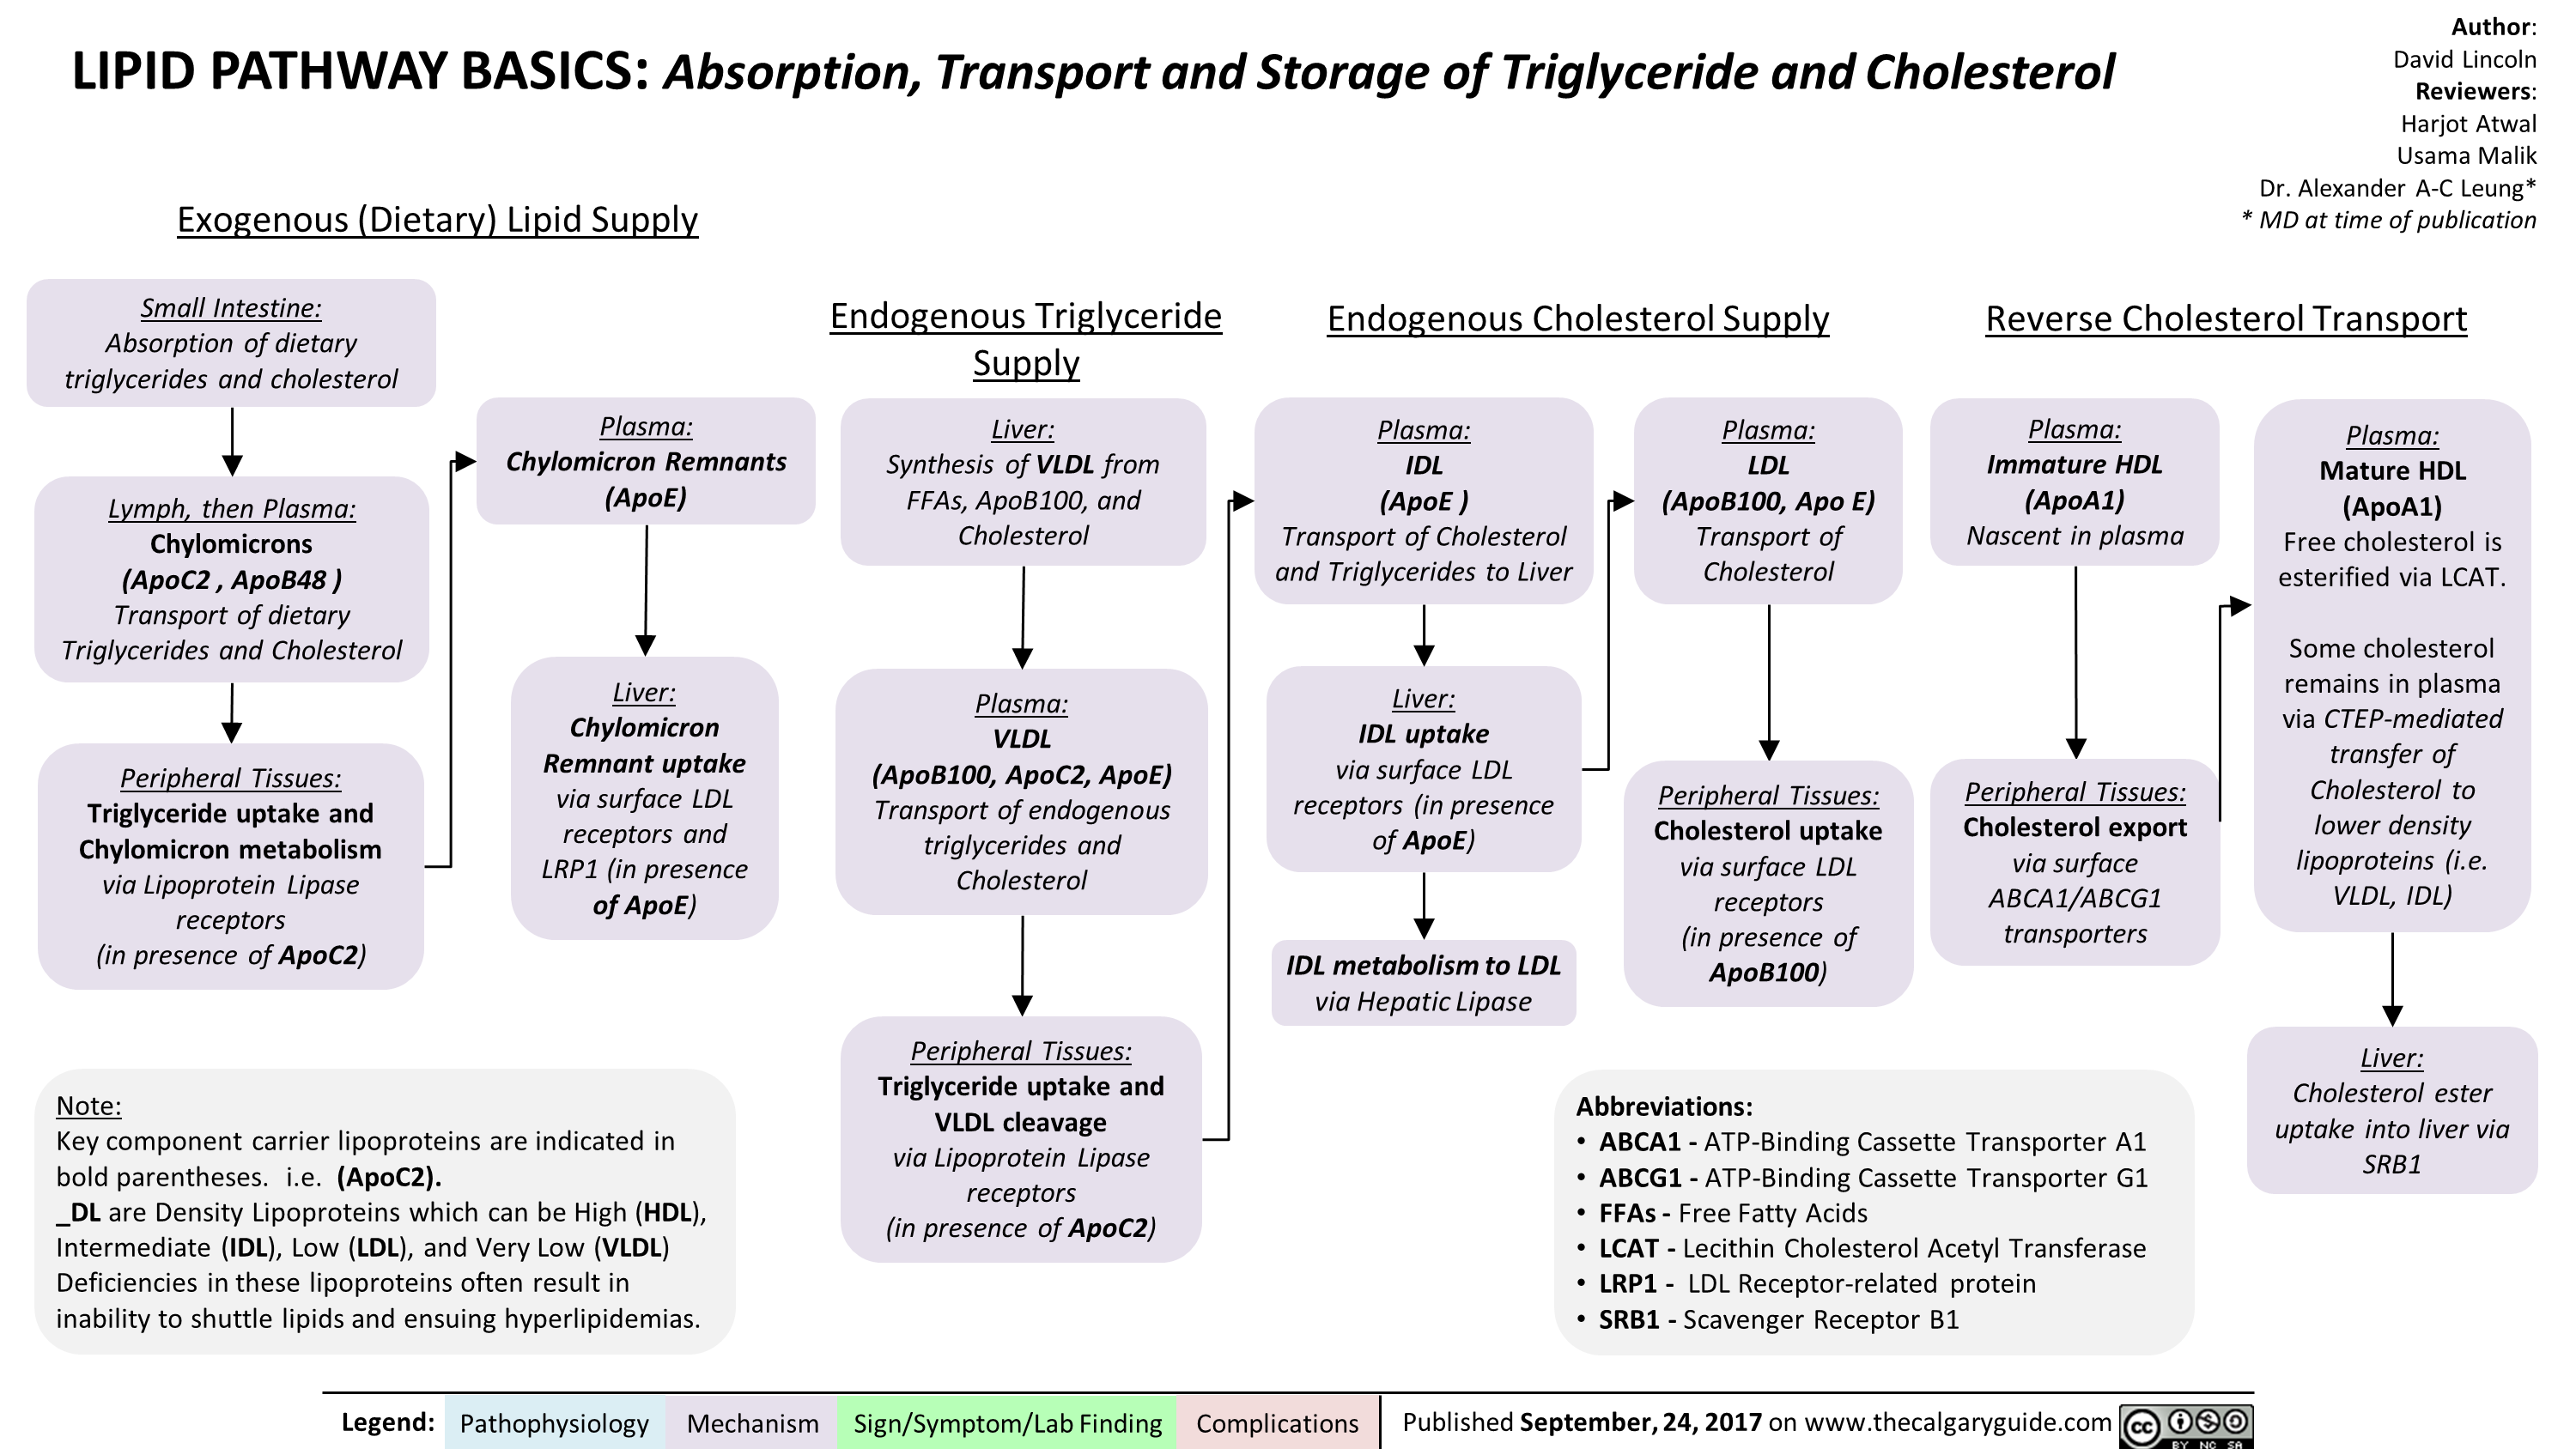 LIPID PATHWAY BASICS: Absorption, Transport and Storage of Triglyceride and Cholesterol 
Exogenous (Dietary) Lipid Supply 
Small Intestine:  Absorption of dietary triglycerides and cholesterol 
Lymph, then Plasma:  Chylomicrons (ApoC2 , ApoB48 ) Transport of dietary Triglycerides and Cholesterol 
Peripheral Tissues:  Triglyceride uptake and Chylomicron metabolism via Lipoprotein Lipase receptors (in presence of ApoC2) 
Plasma:  Chylomicron Remnants (ApoE) 
Liver:  Chylomicron Remnant uptake via surface LDL receptors and LRP1 (in presence of ApoE) 
Note:  Key component carrier lipoproteins are indicated in bold parentheses. i.e. (ApoC2). _DL are Density Lipoproteins which can be High (HDL), Intermediate (IDL), Low (LDL), and Very Low (VLDL) Deficiencies in these lipoproteins often result in inability to shuttle lipids and ensuing hyperlipidemias. 
Endogenous Triglyceride Supply  
Liver:  Synthesis of VLDL from FFAs, ApoB100, and Cholesterol 
Plasma:  VLDL (ApoB100, ApoC2, ApoE) Transport of endogenous triglycerides and Cholesterol 
Peripheral Tissues:  Triglyceride uptake and VLDL cleavage via Lipoprotein Lipase receptors (in presence of ApoC2) 
Endogenous Cholesterol Supply 
Plasma:  IDL (ApoE ) Transport of Cholesterol and Triglycerides to Liver 
Liver:  IDL uptake via surface LDL receptors (in presence of ApoE) 
IDL metabolism to LDL via Hepatic Lipase 
Plasma:  LDL (ApoB100, Apo E) Transport of Cholesterol 
Peripheral Tissues:  Cholesterol uptake via surface LDL receptors (in presence of ApoB100) 
Author: David Lincoln Reviewers: Harjot Atwal Usama Malik Dr. Alexander A-C Leung* * MD at time of publication 
Reverse Cholesterol Transport 
Plasma:  Immature HDL (ApoAl) Nascent in plasma 
• 
Peripheral Tissues: Cholesterol export via surface ABCA1/ABCG1 transporters 
Abbreviations: • ABCA1 - ATP-Binding Cassette Transporter Al • ABCG1 - ATP-Binding Cassette Transporter G1 • FFAs - Free Fatty Acids • LCAT - Lecithin Cholesterol Acetyl Transferase • LRP1 - LDL Receptor-related protein • SRB1 - Scavenger Receptor B1 
Plasma:  Mature HDL (ApoAl) Free cholesterol is esterified via LCAT. 
Some cholesterol remains in plasma via CTEP-mediated transfer of Cholesterol to lower density lipoproteins (i.e. VLDL, IDL) 
Liver:  Cholesterol ester uptake into liver via SRB1 
Legend: Pathophysiology Mechanism Sign/Symptom/Lab Finding Complications Published September, 24,2017 on www.thecalgaryguide.com